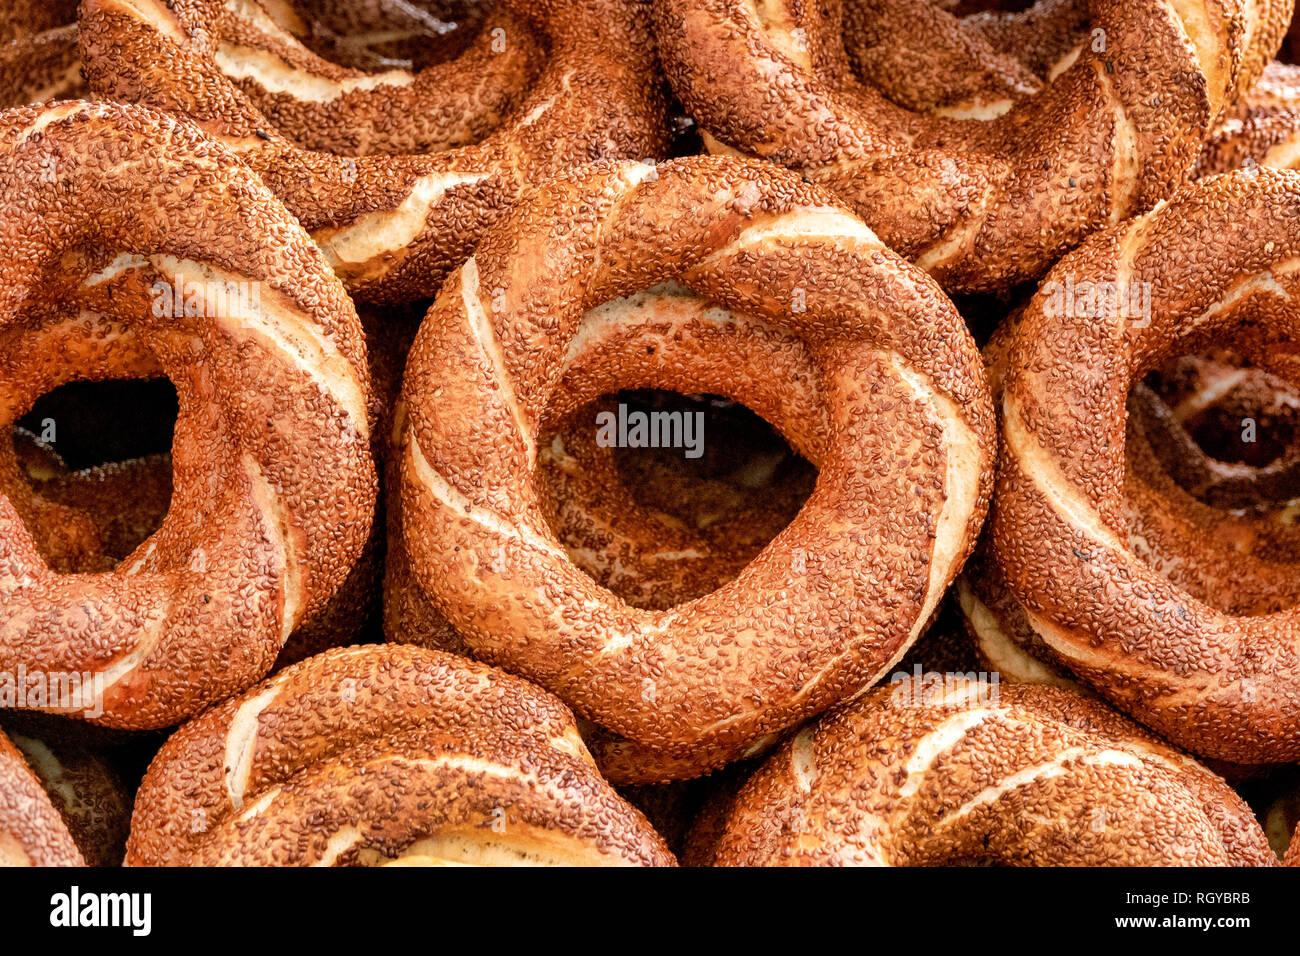 Simit, a circular bread, typically encrusted with sesame seeds found across the cuisines of the former Ottoman Empire. Stock Photo